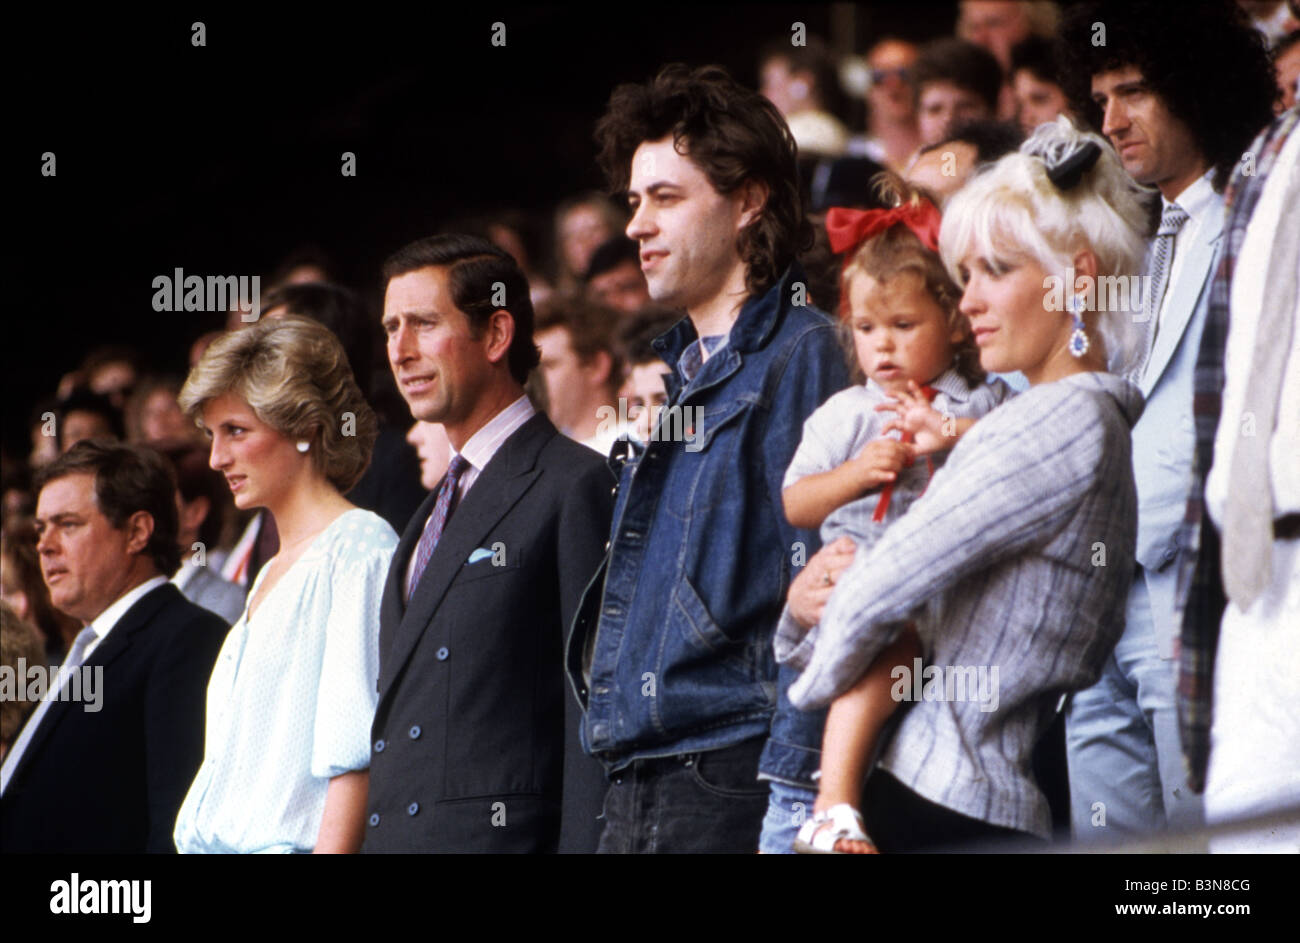 LIVE AID at Wembley Stadium, London, 13 July 1985 with from left Princess of Wales, Prince Charles, Bob Geldof wife and child Stock Photo